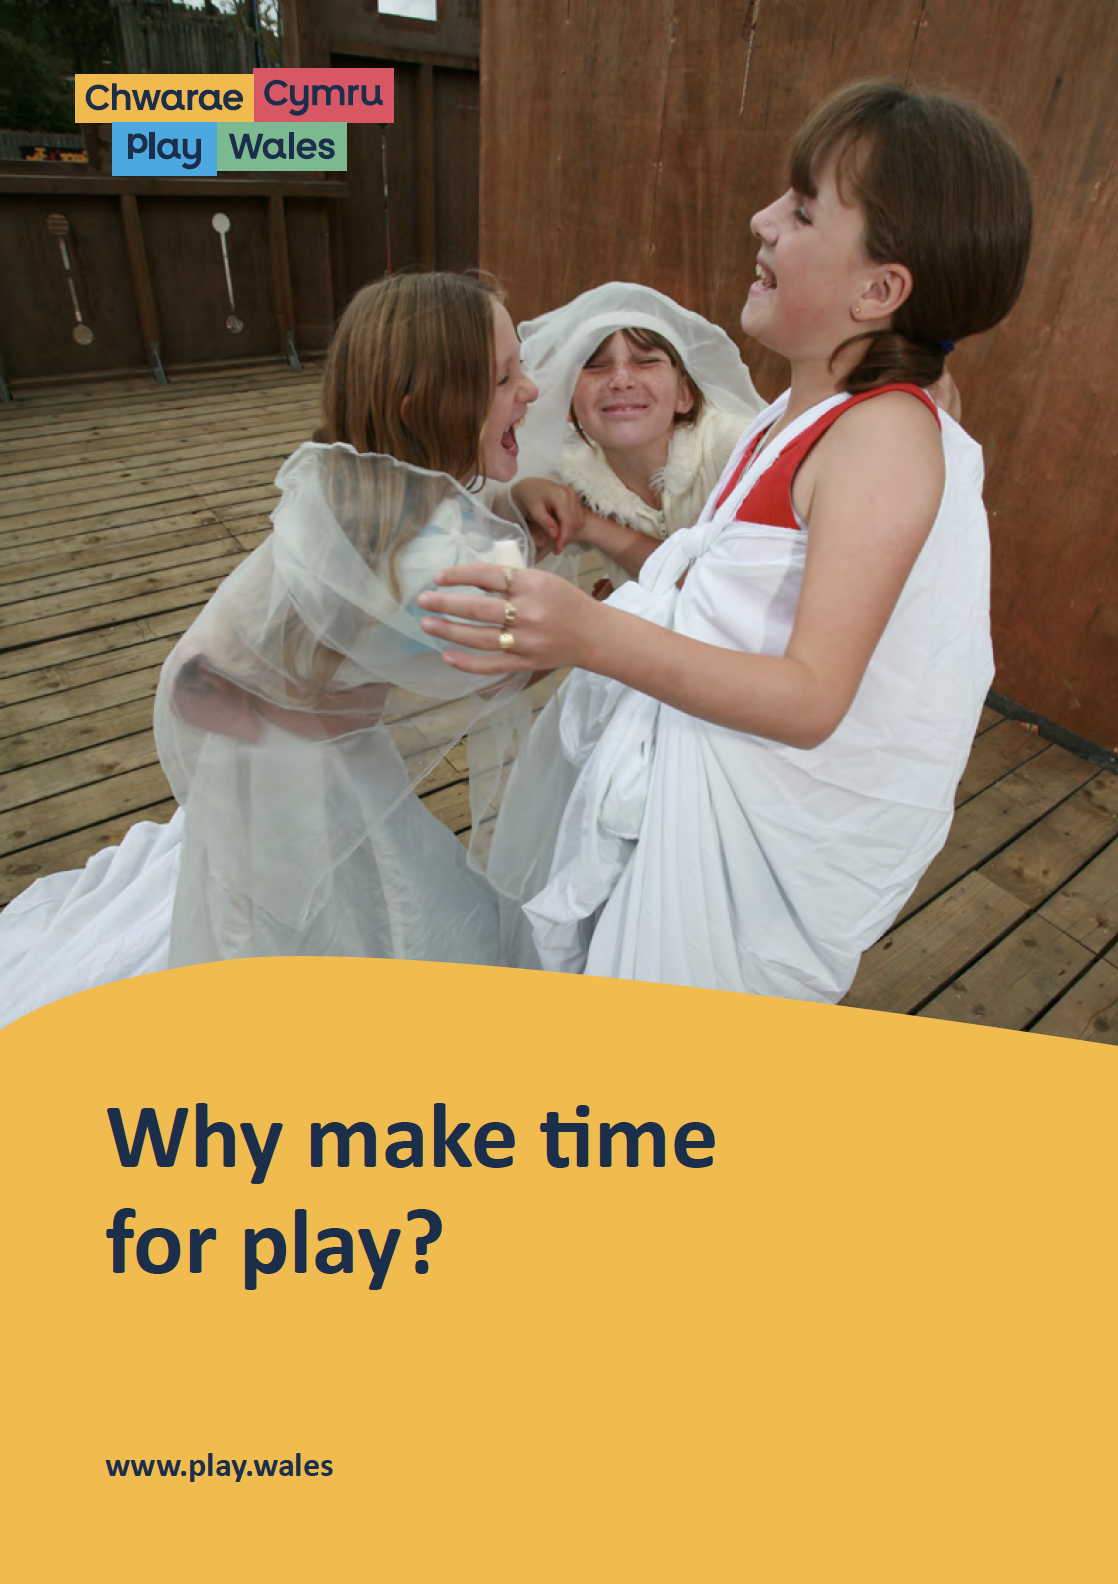 Why make time for play?